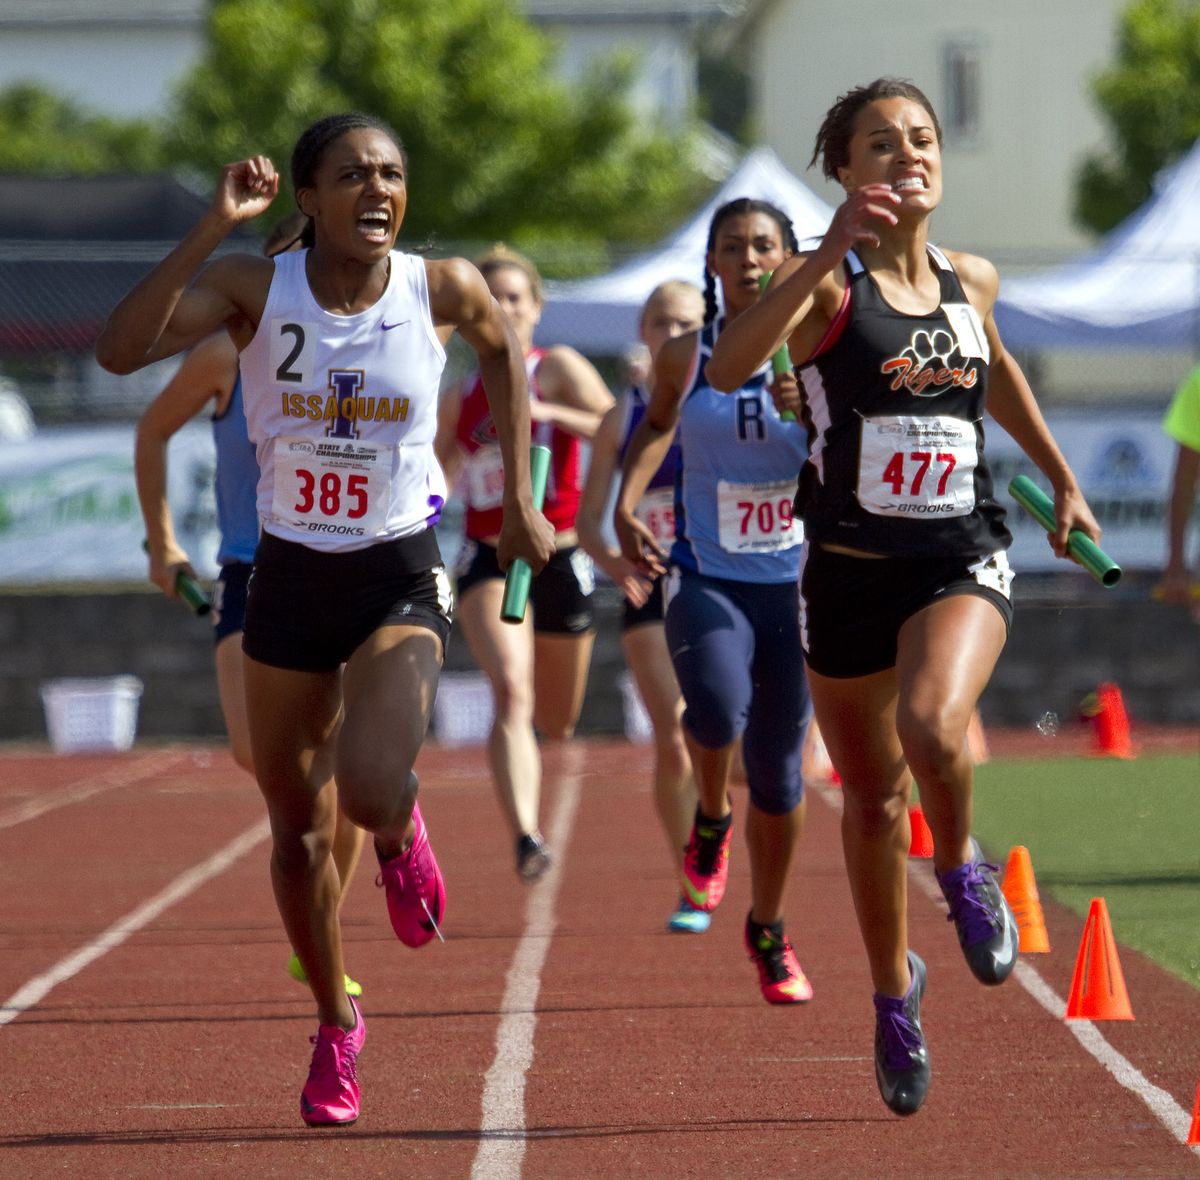 Lewis and Clark’s Olivia Ellis, right, edges Issaquah’s Nikki Stephens in the anchor leg of the 4A 4x200 relay. (Patrick Hagerty)